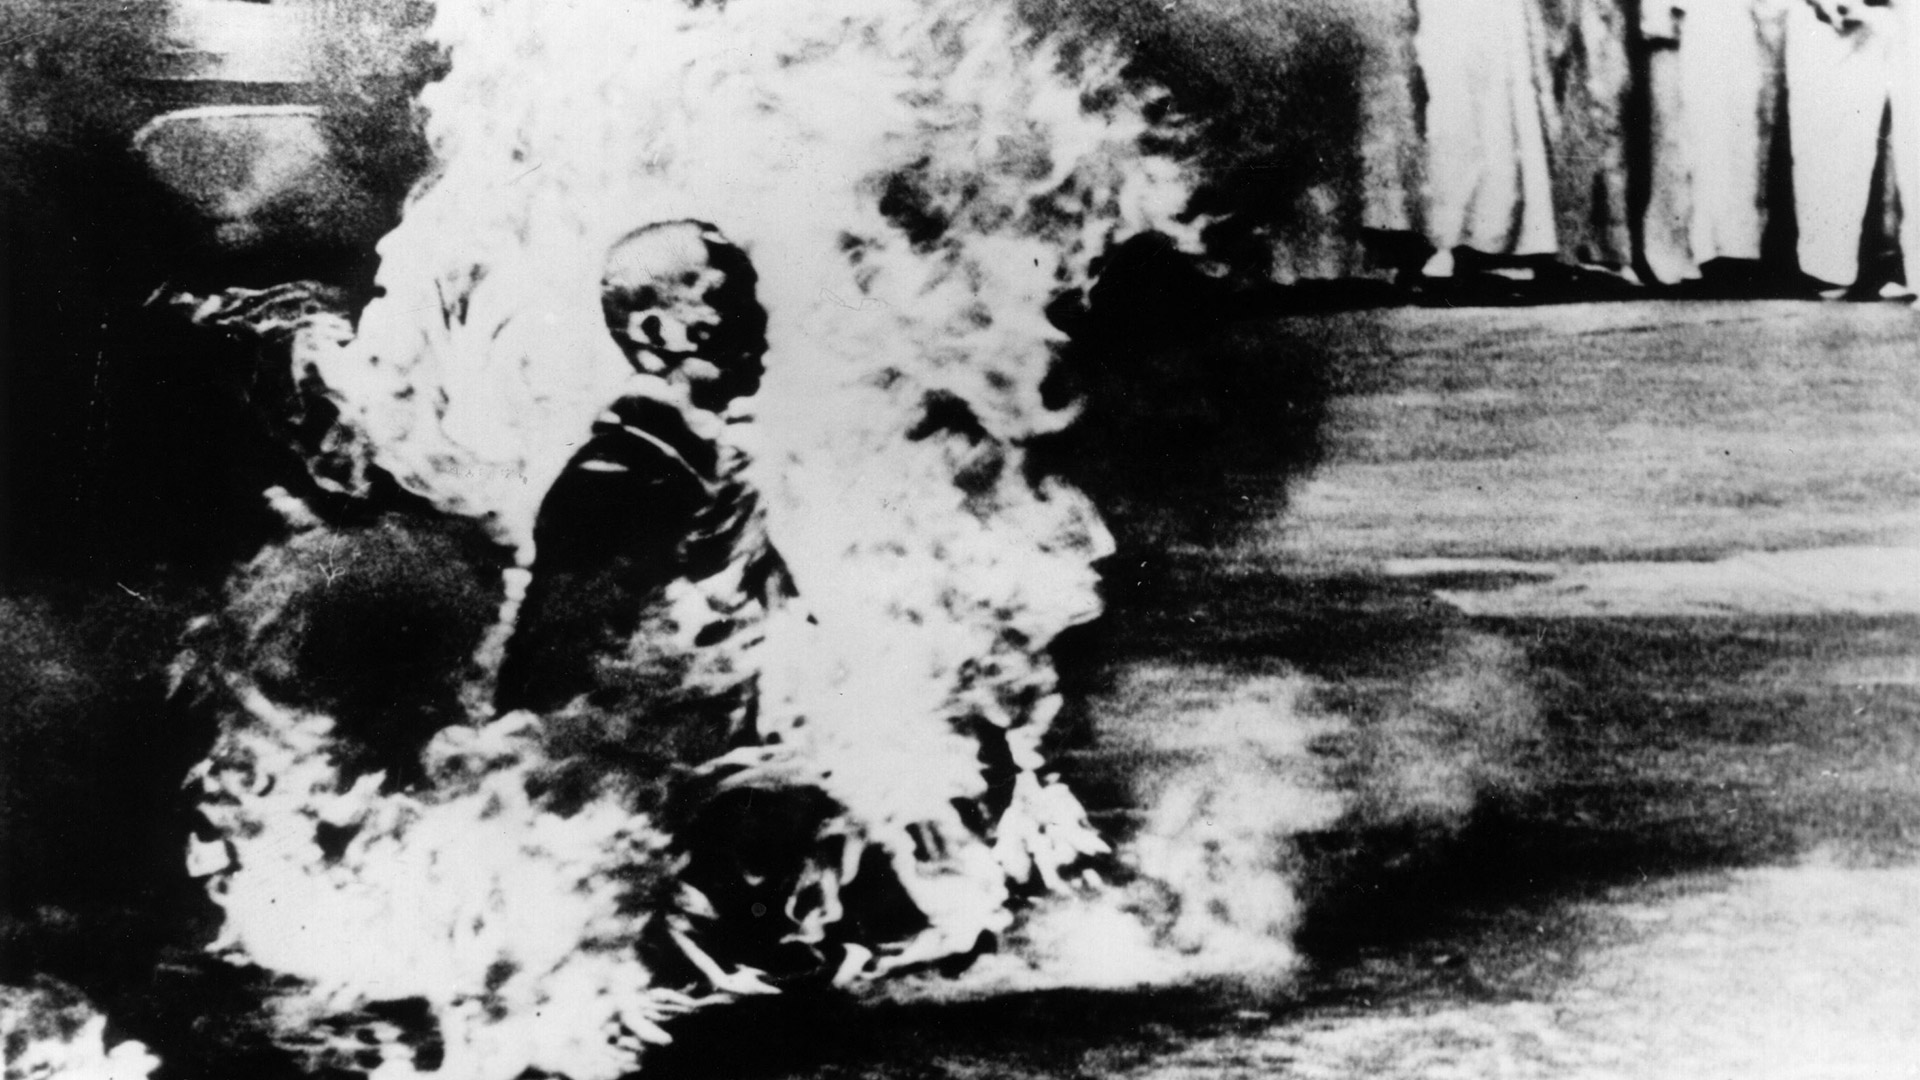 June 11, 1963: Buddhist monk Thich Quang Duc staged his final protest in Saigon by setting himself on fire (Photo by Keystone/Getty Images)